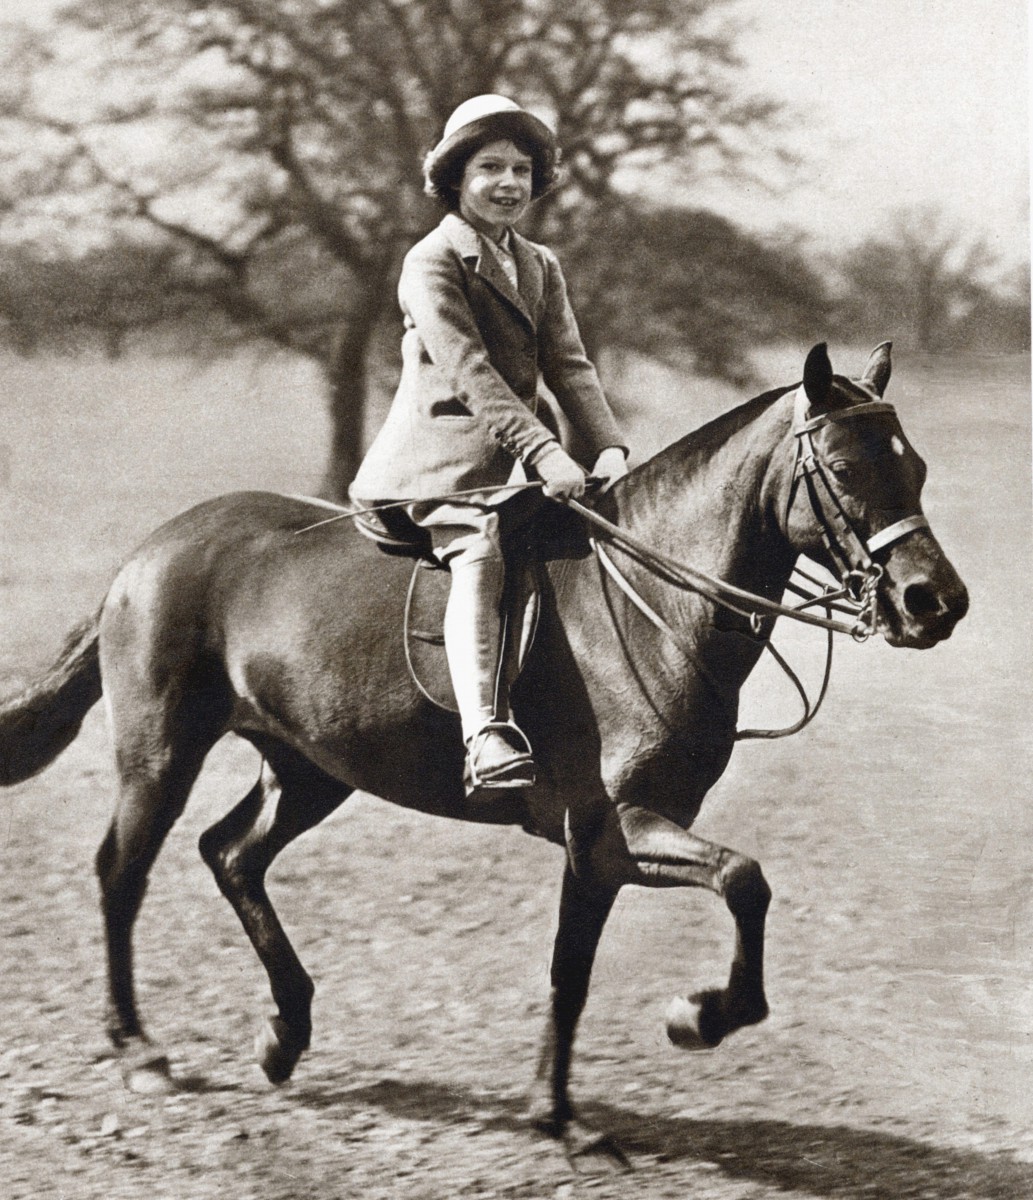 Her Majesty, pictured in 1934, riding her pony in Windsor Great Park